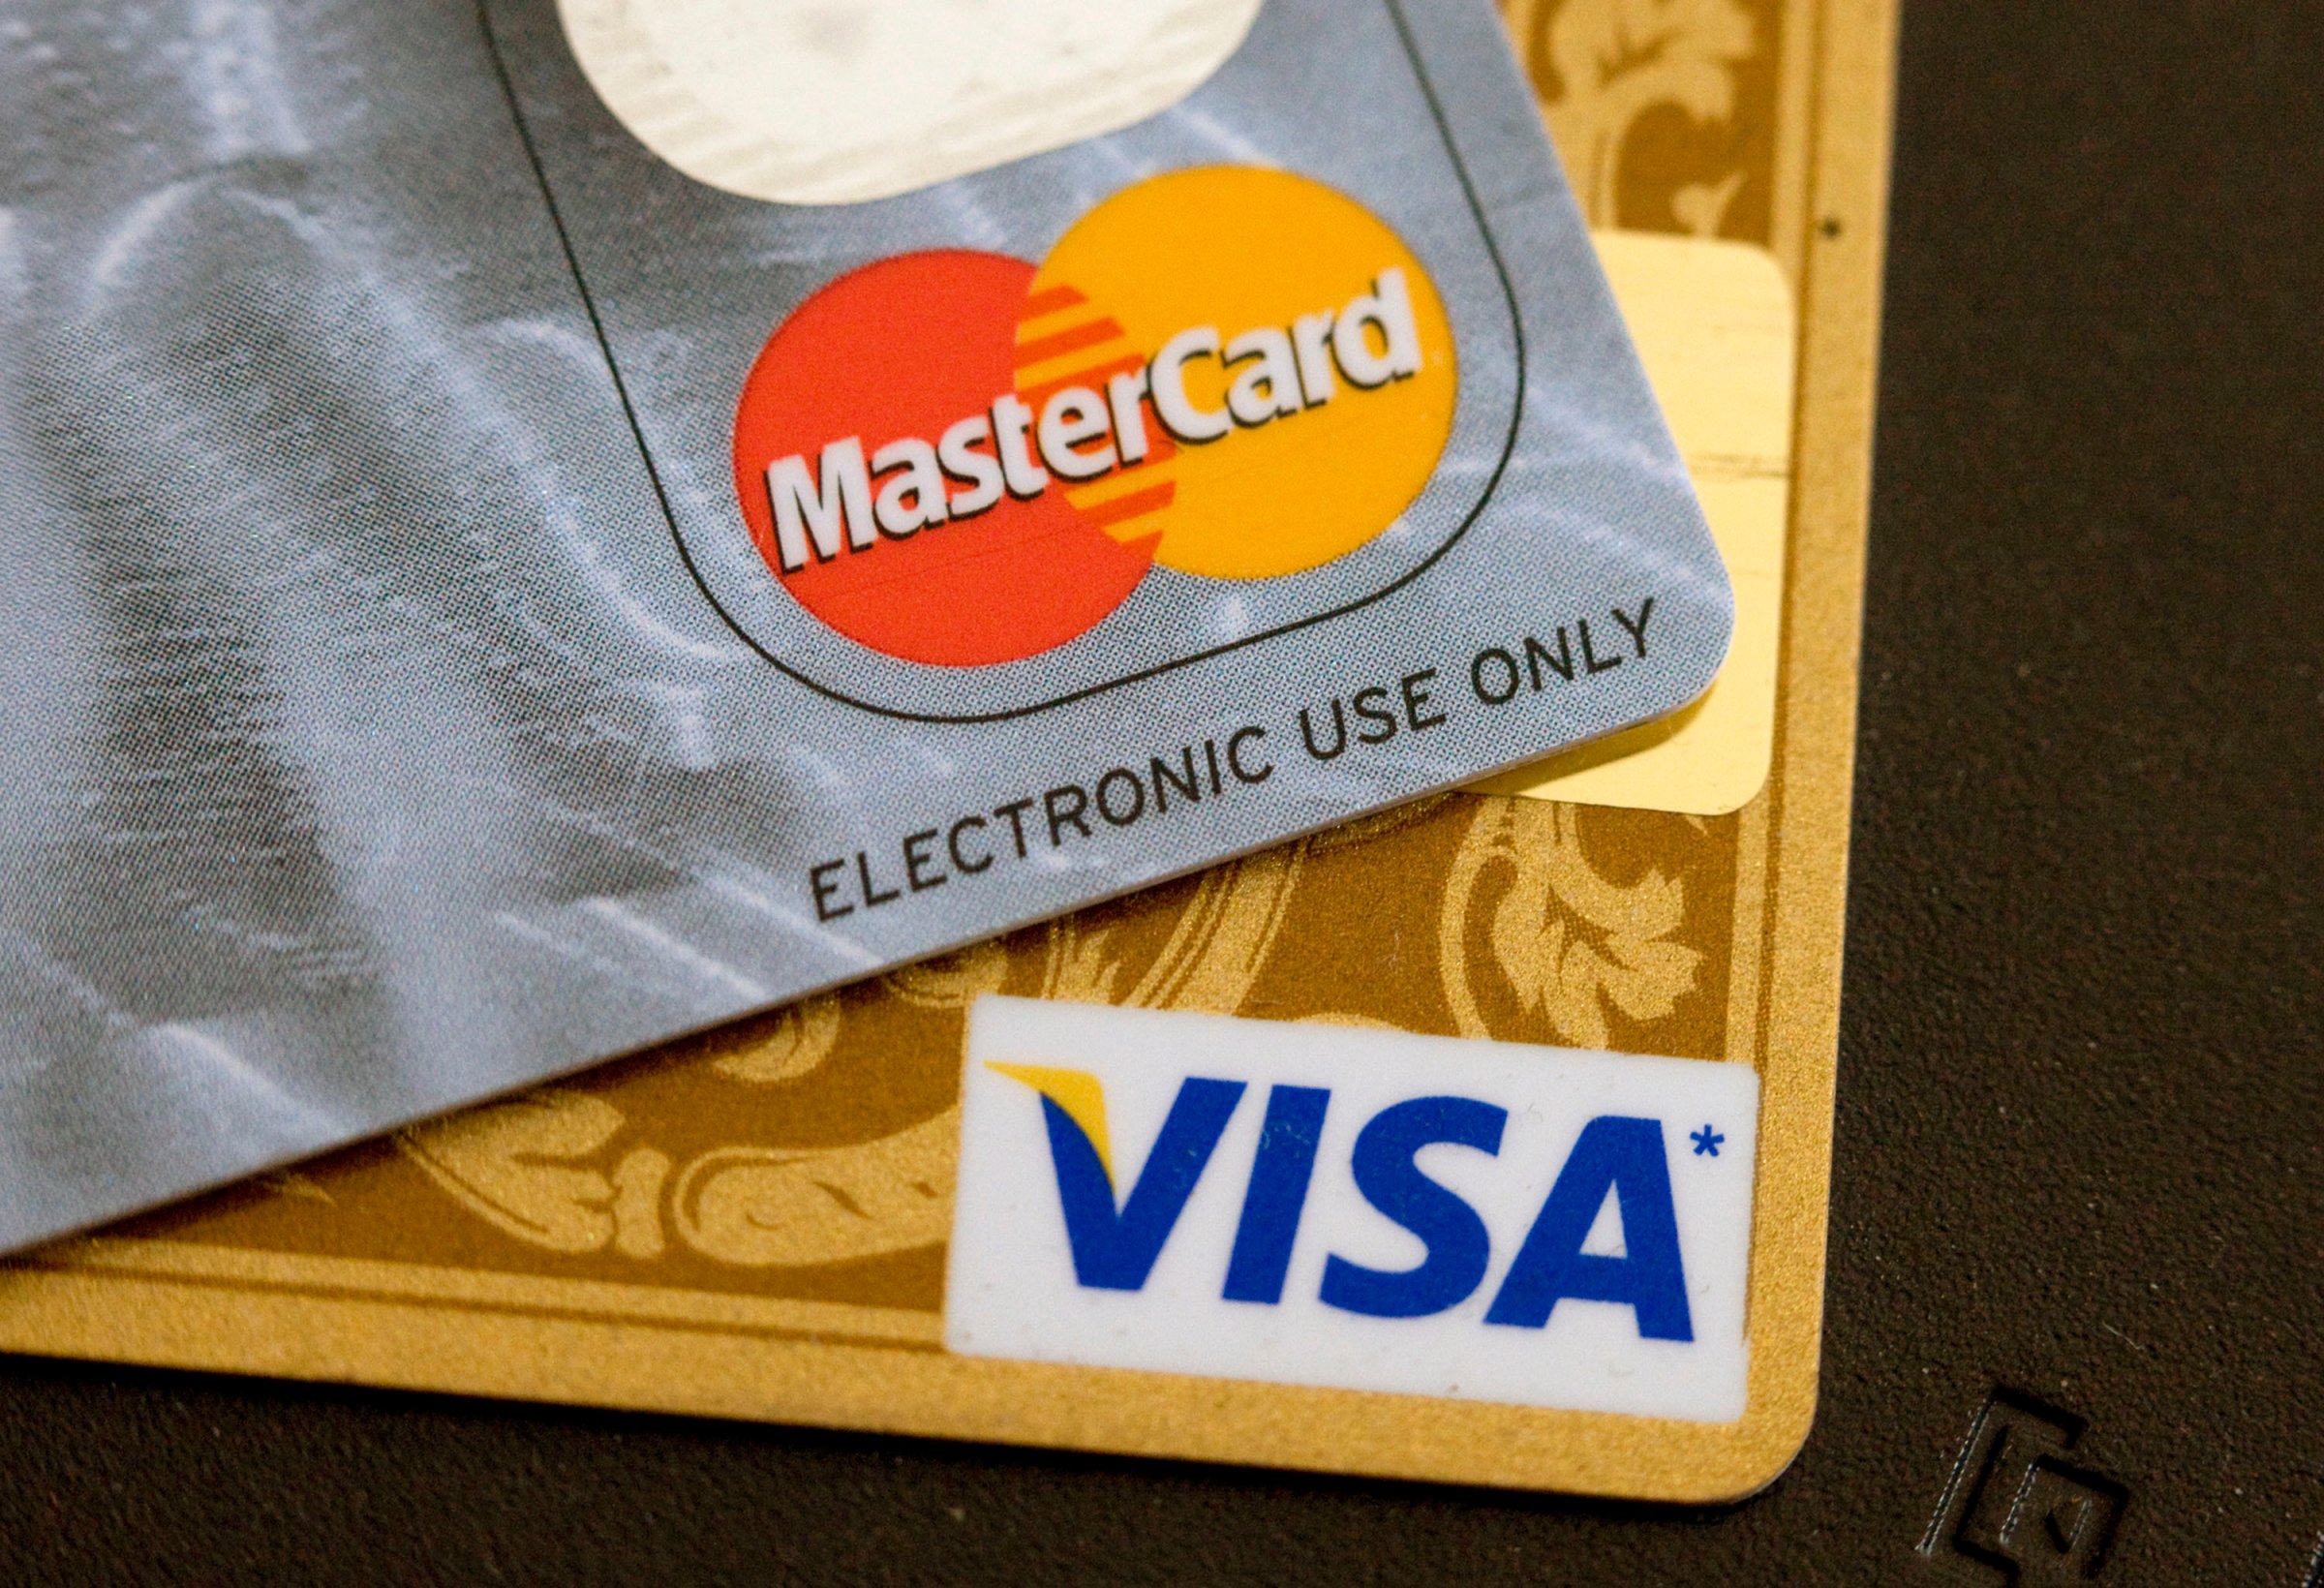 Visa and MasterCard credit cards are arranged for a photo in